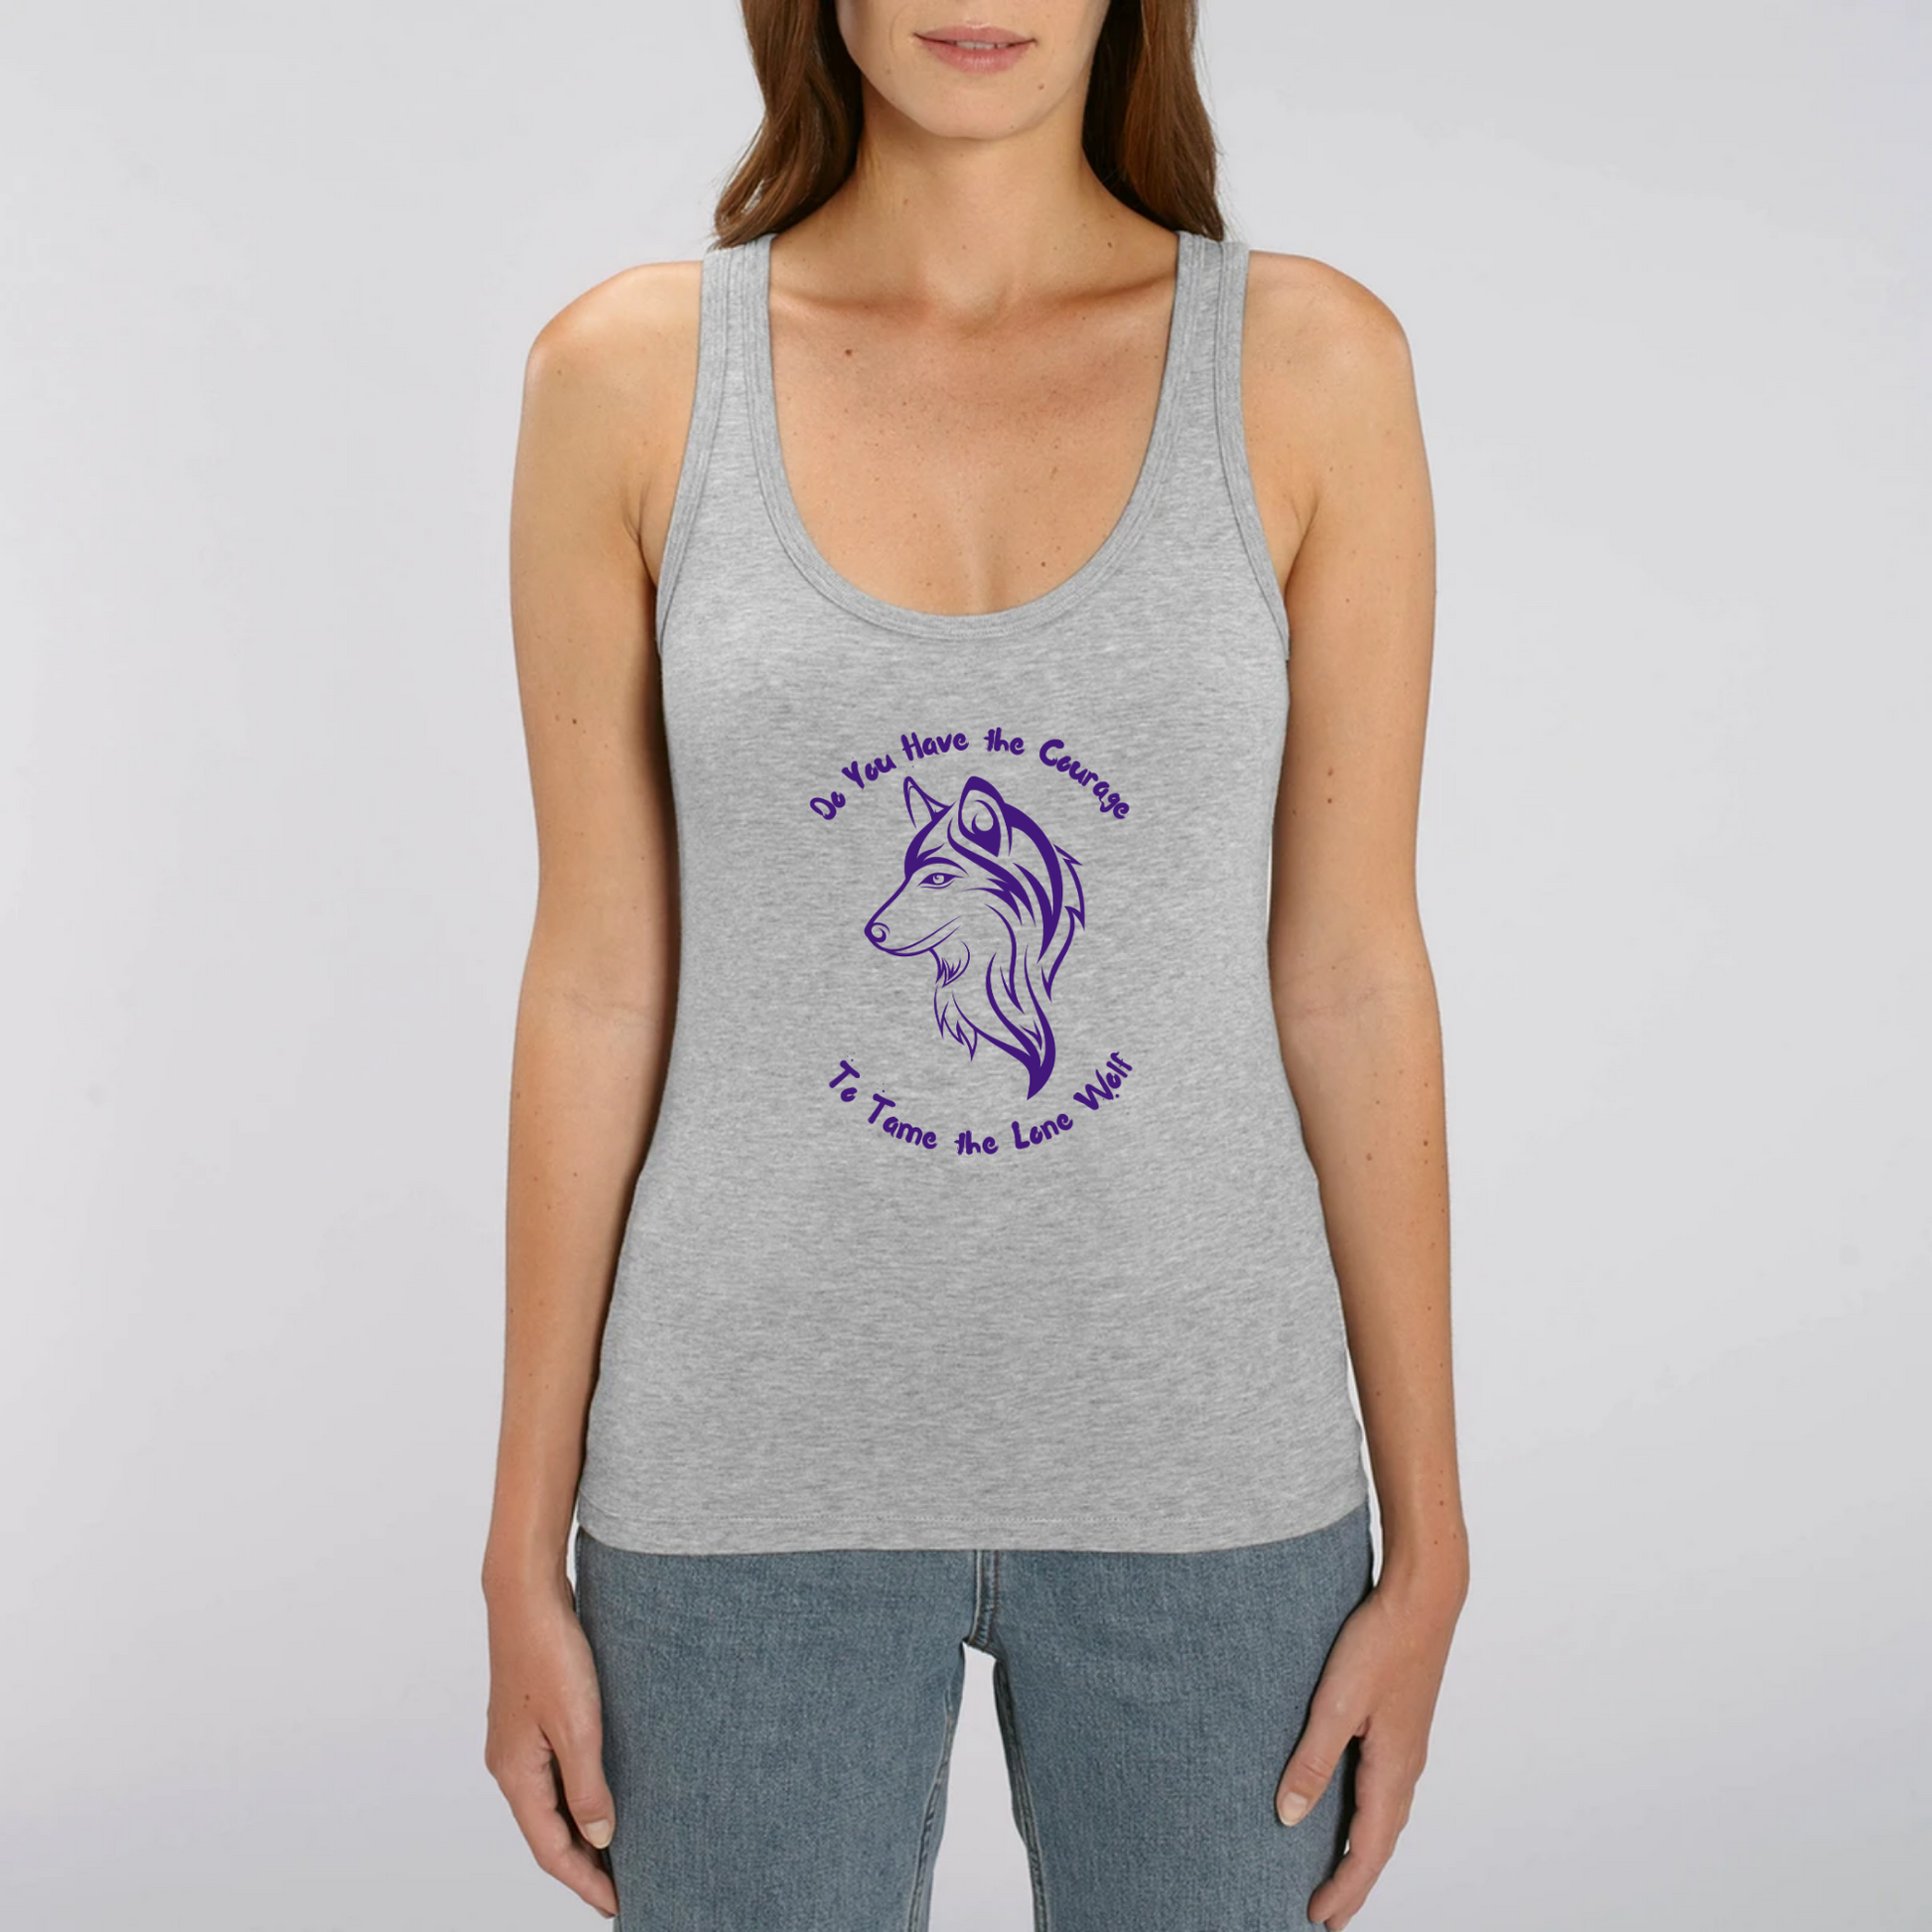 Model wearing a tank top with graphic design of a lone female wolf with wording Do you have the courage to tame the lone wolf. The tank top is grey